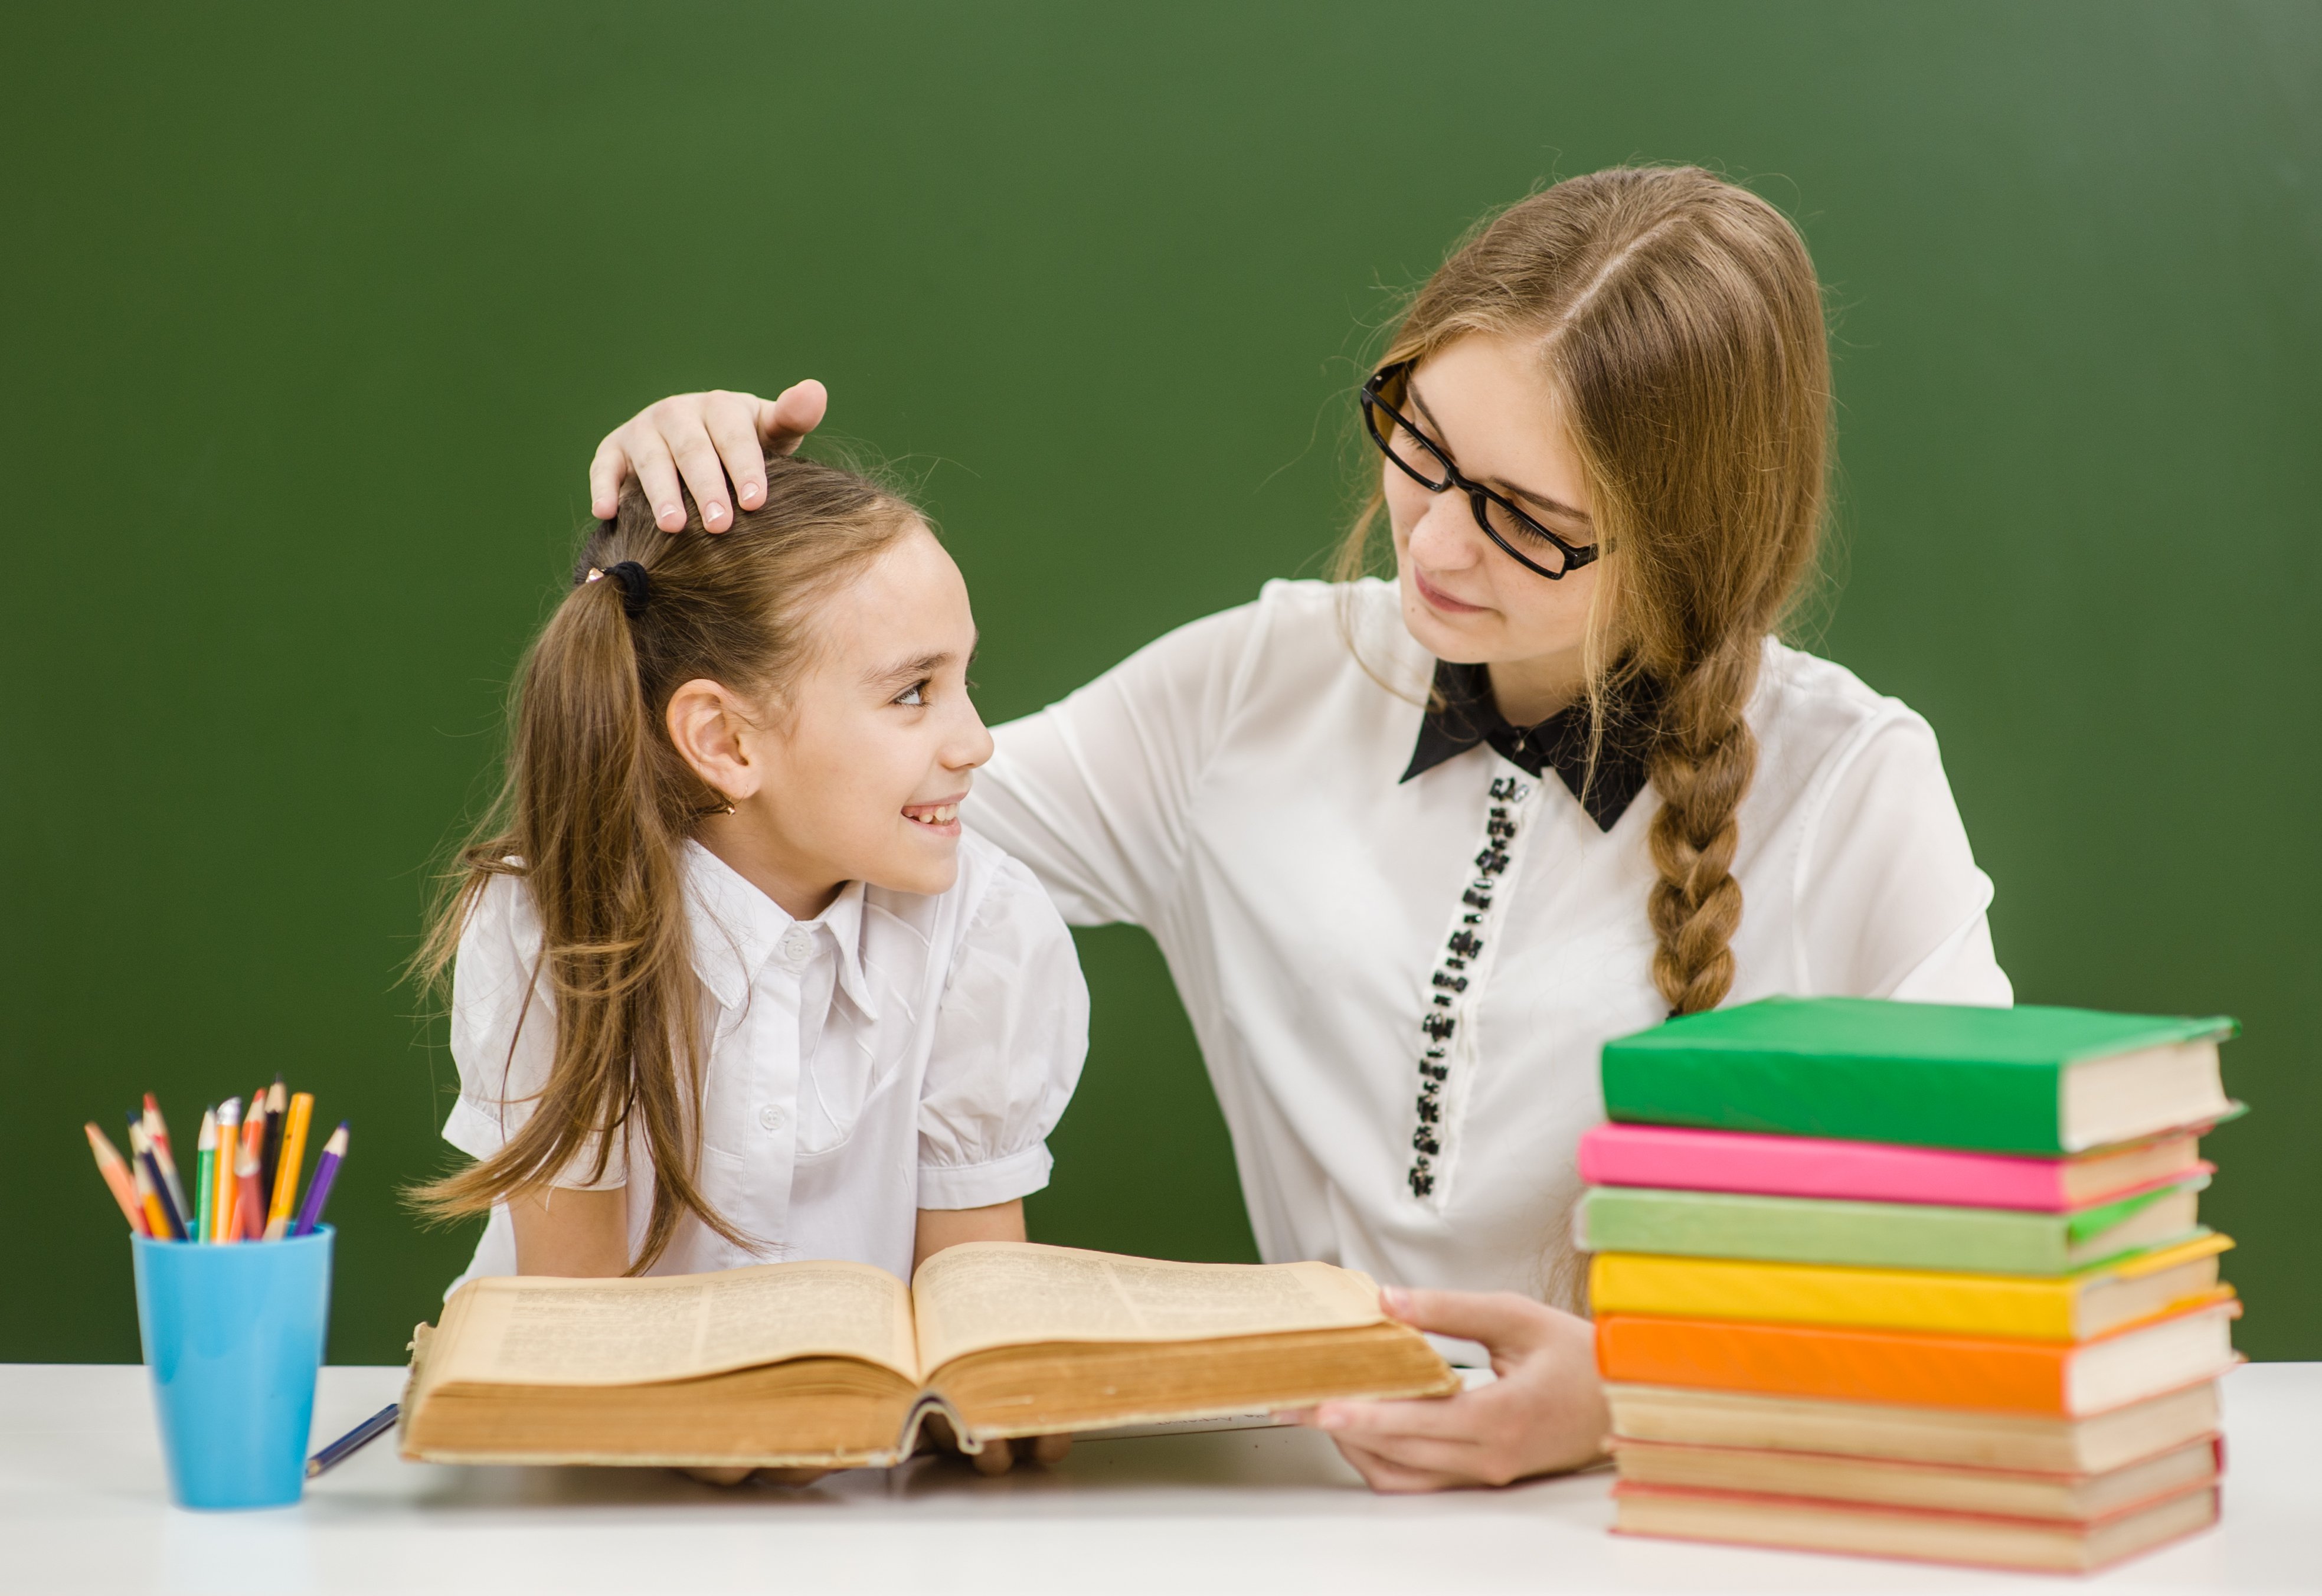 Teacher and student in a classroom | Photo: Shutterstock